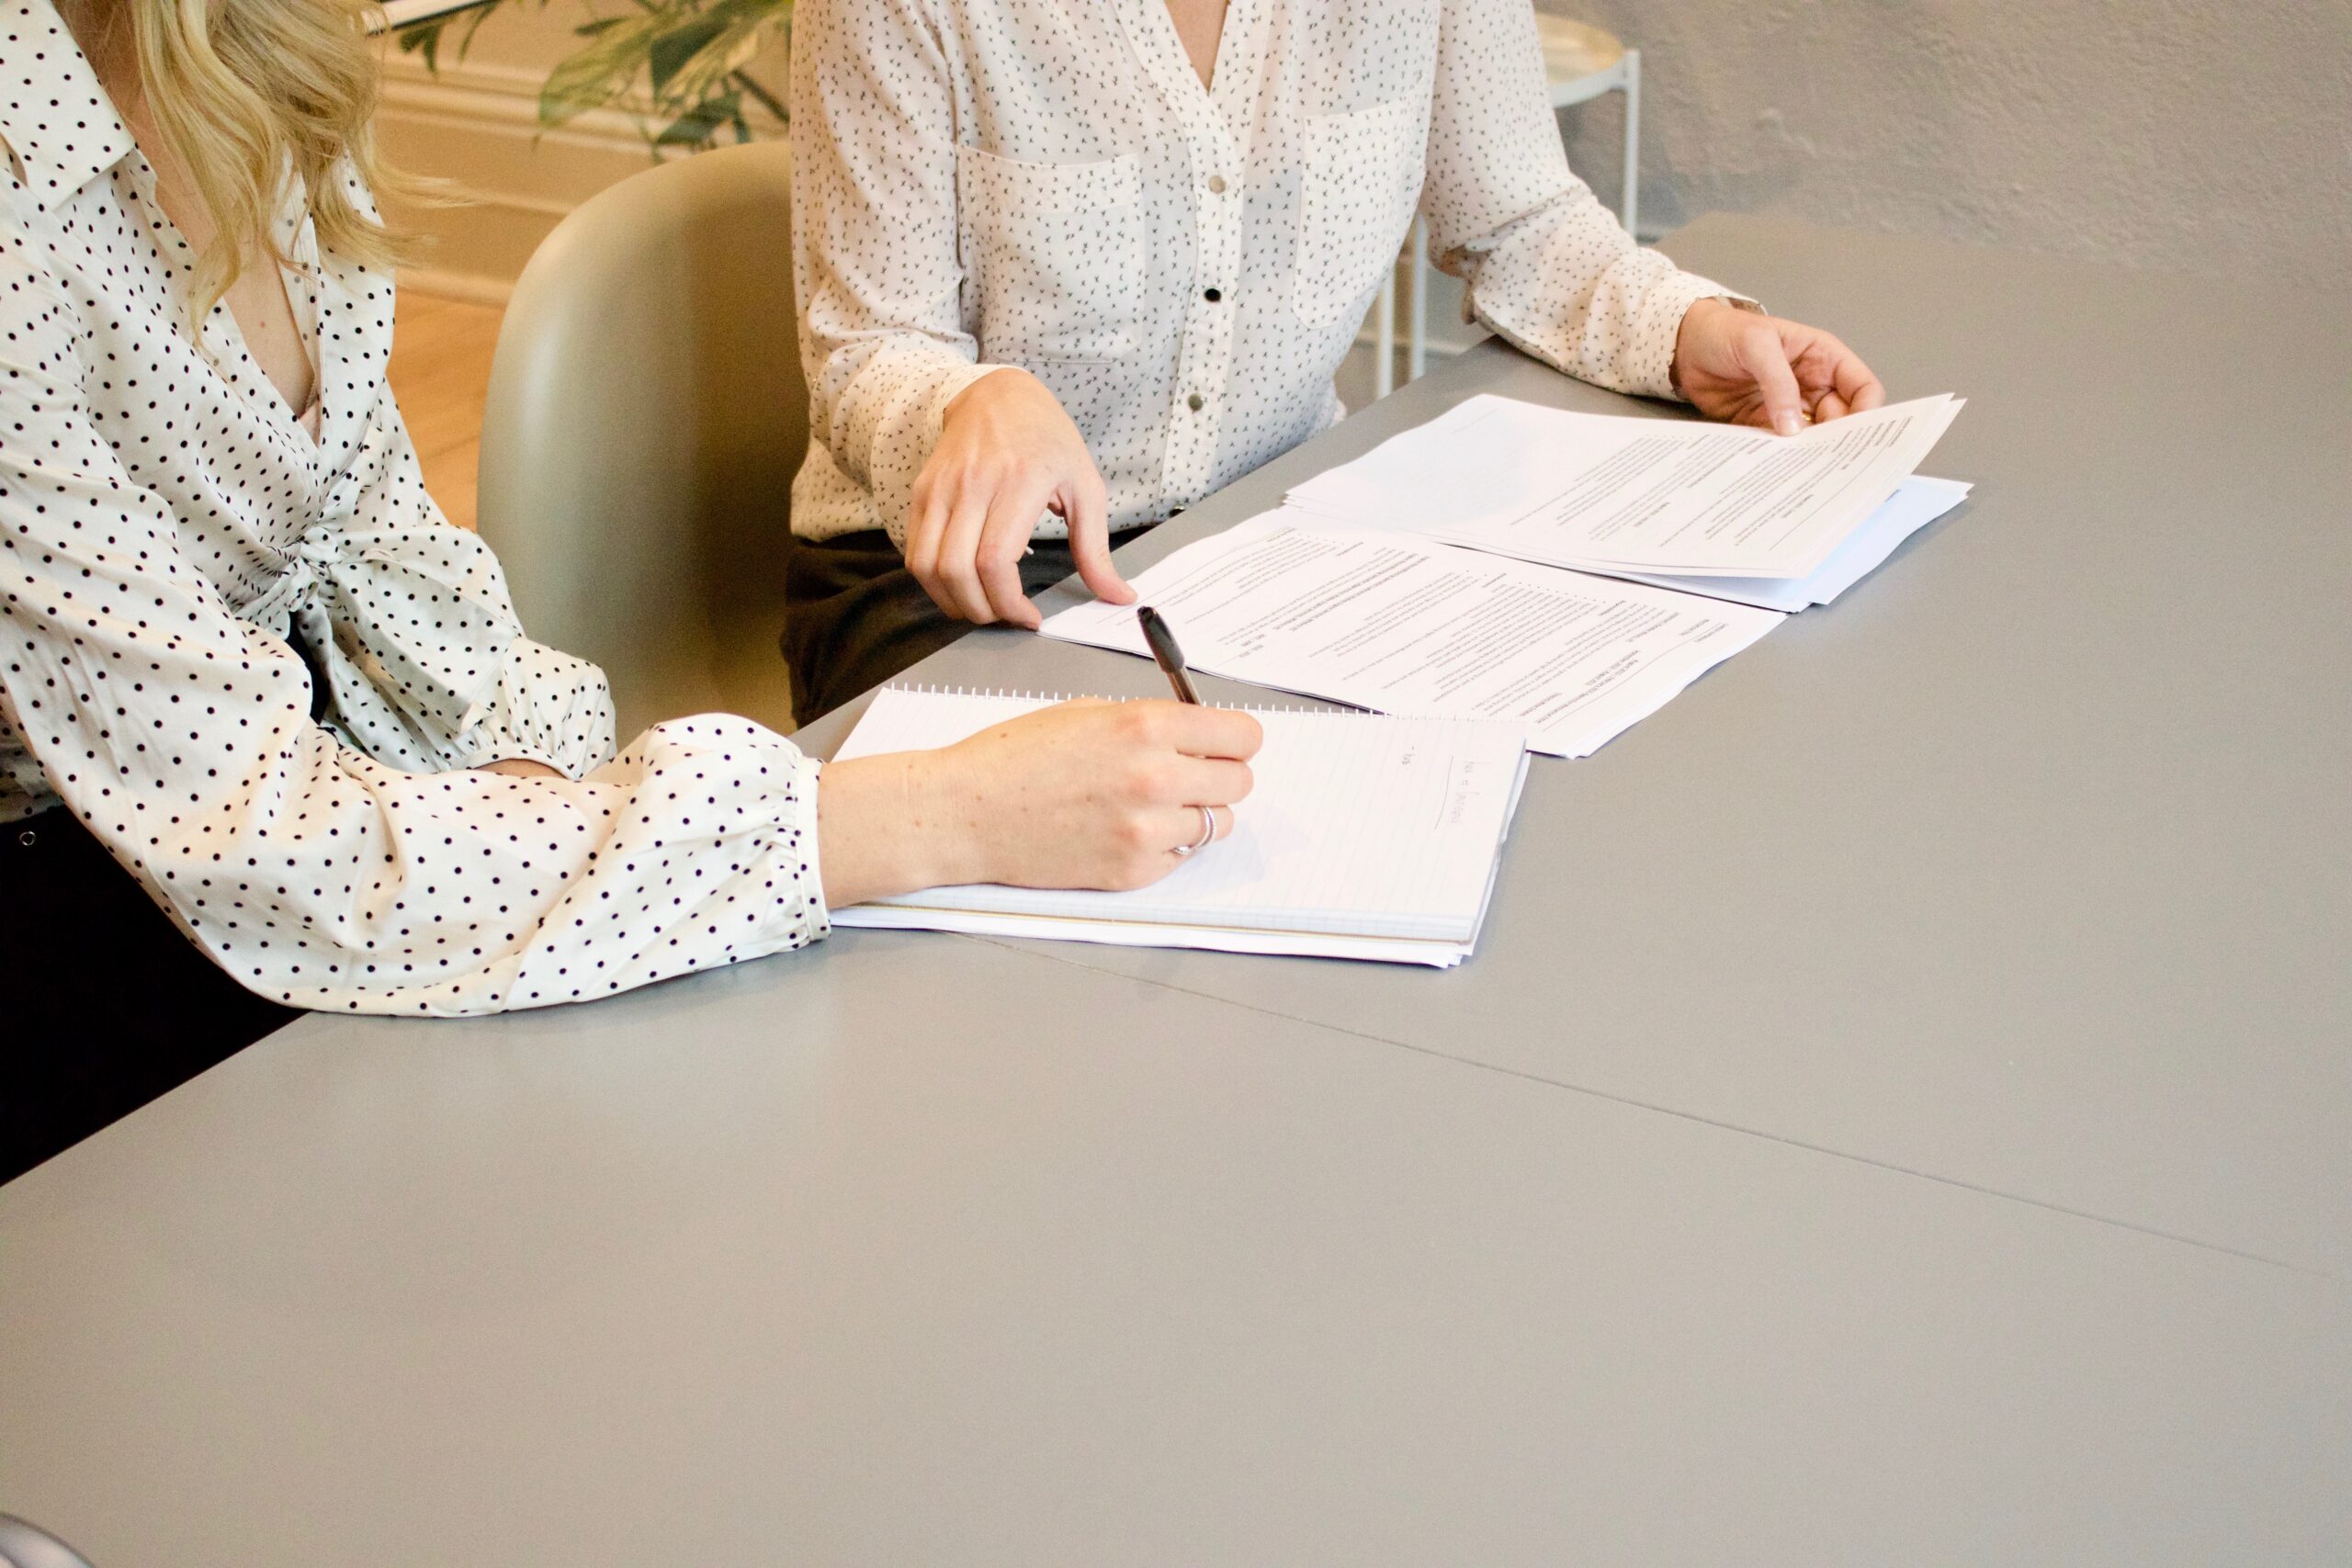 view of two women sitting at a table signing paperwork. faces not visible.